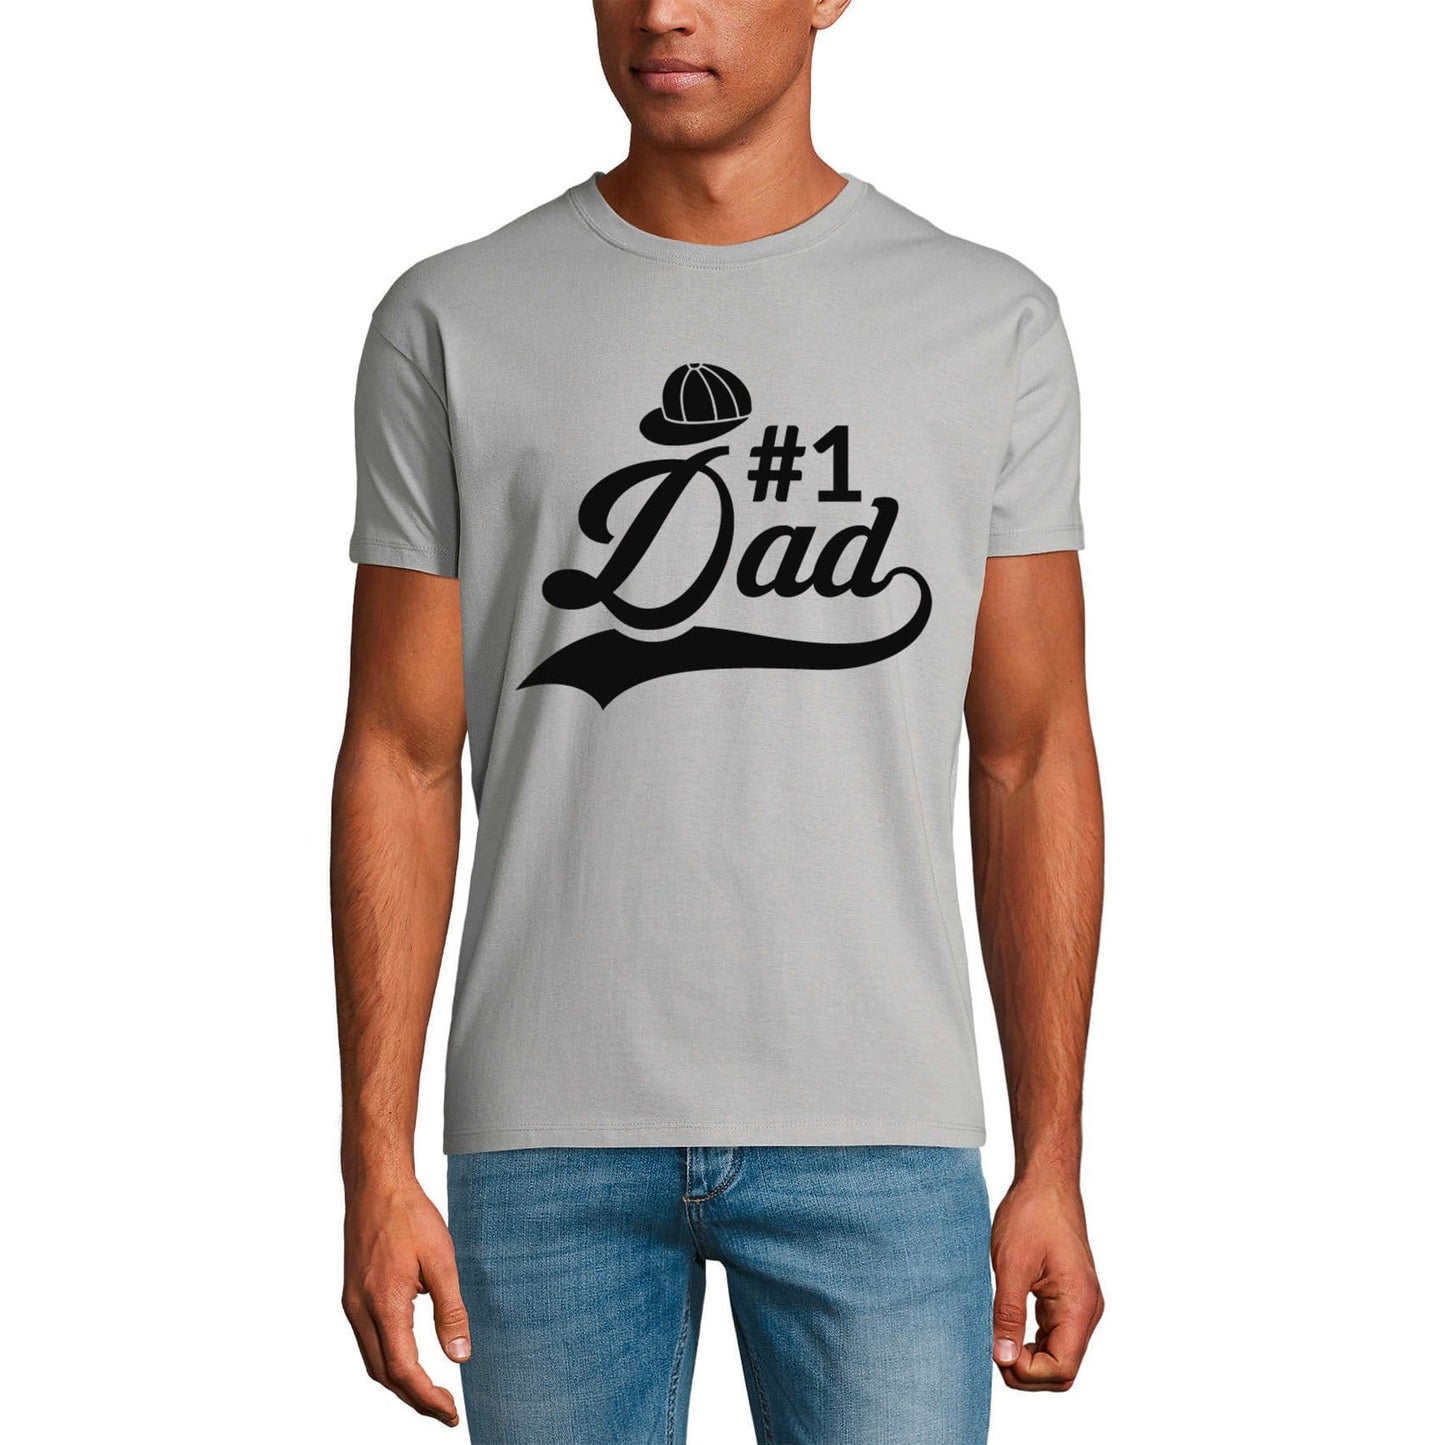 ULTRABASIC Men's Graphic T-Shirt Hashtag 1 Dad - Funny Daddy Sport Shirt - Father's Day